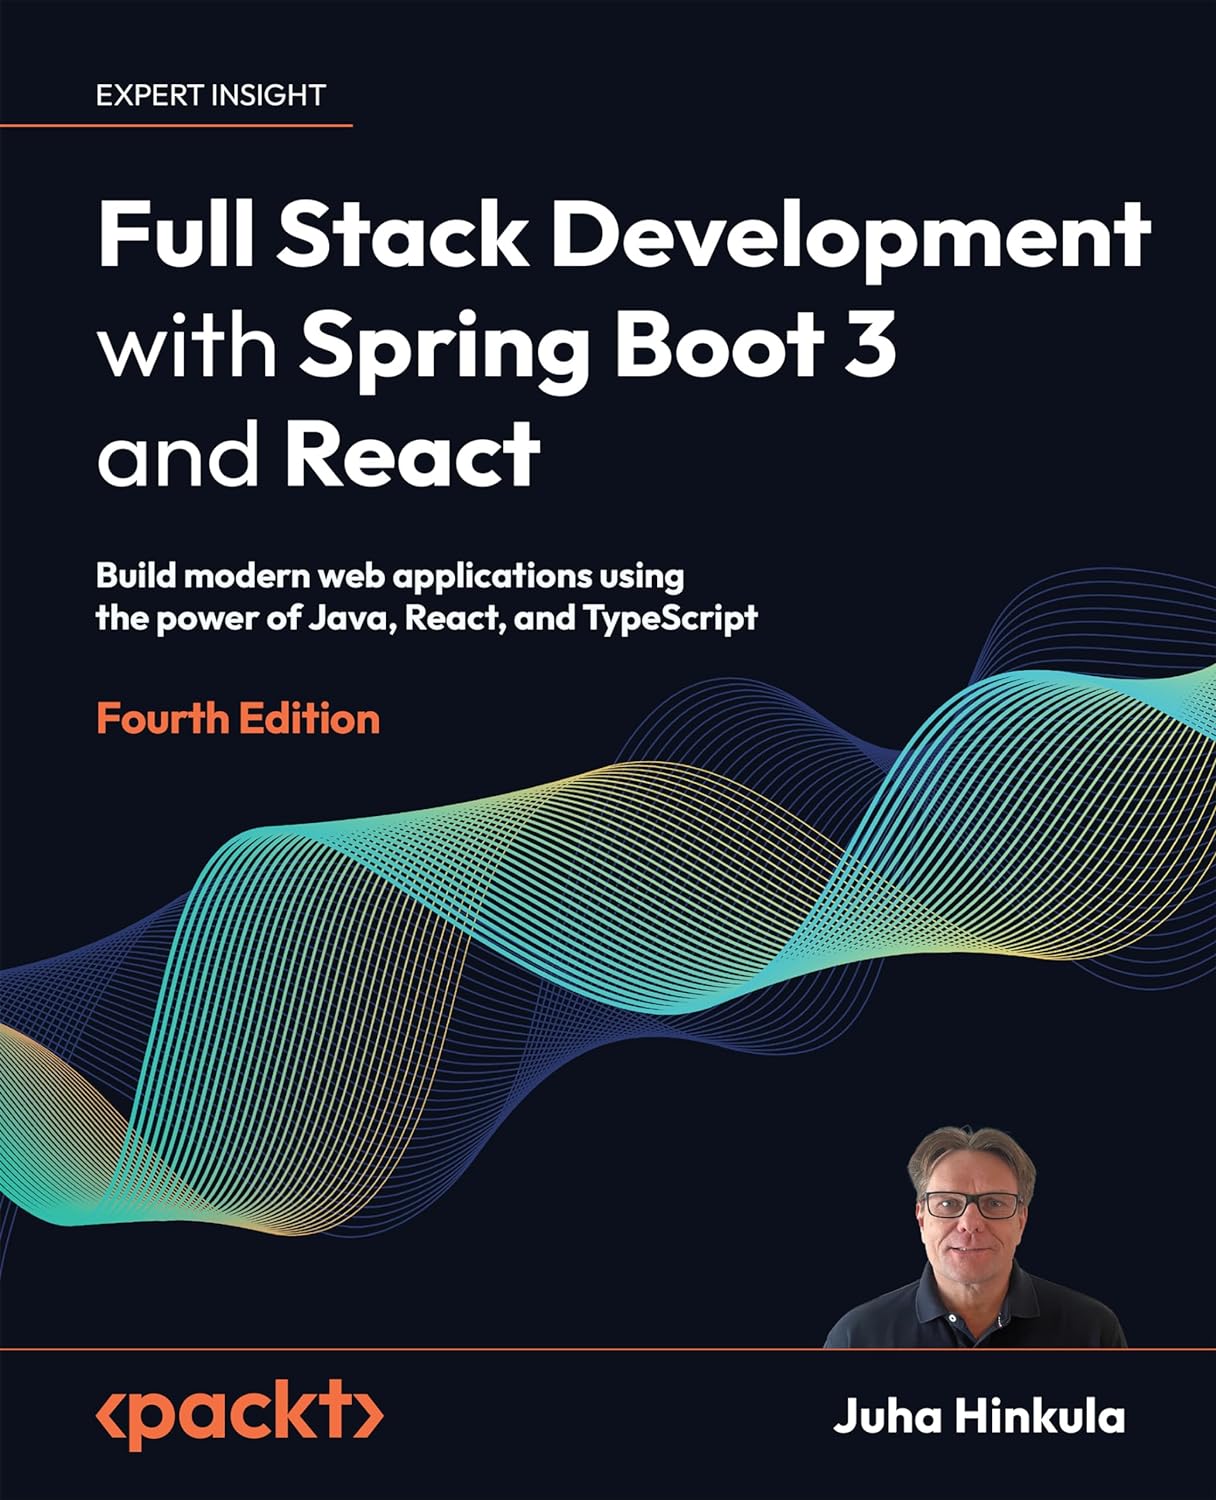 (EBook PDF)Full Stack Development with Spring Boot 3 and React: Build modern web applications using the power of Java, React, and TypeScript by Juha Hinkula